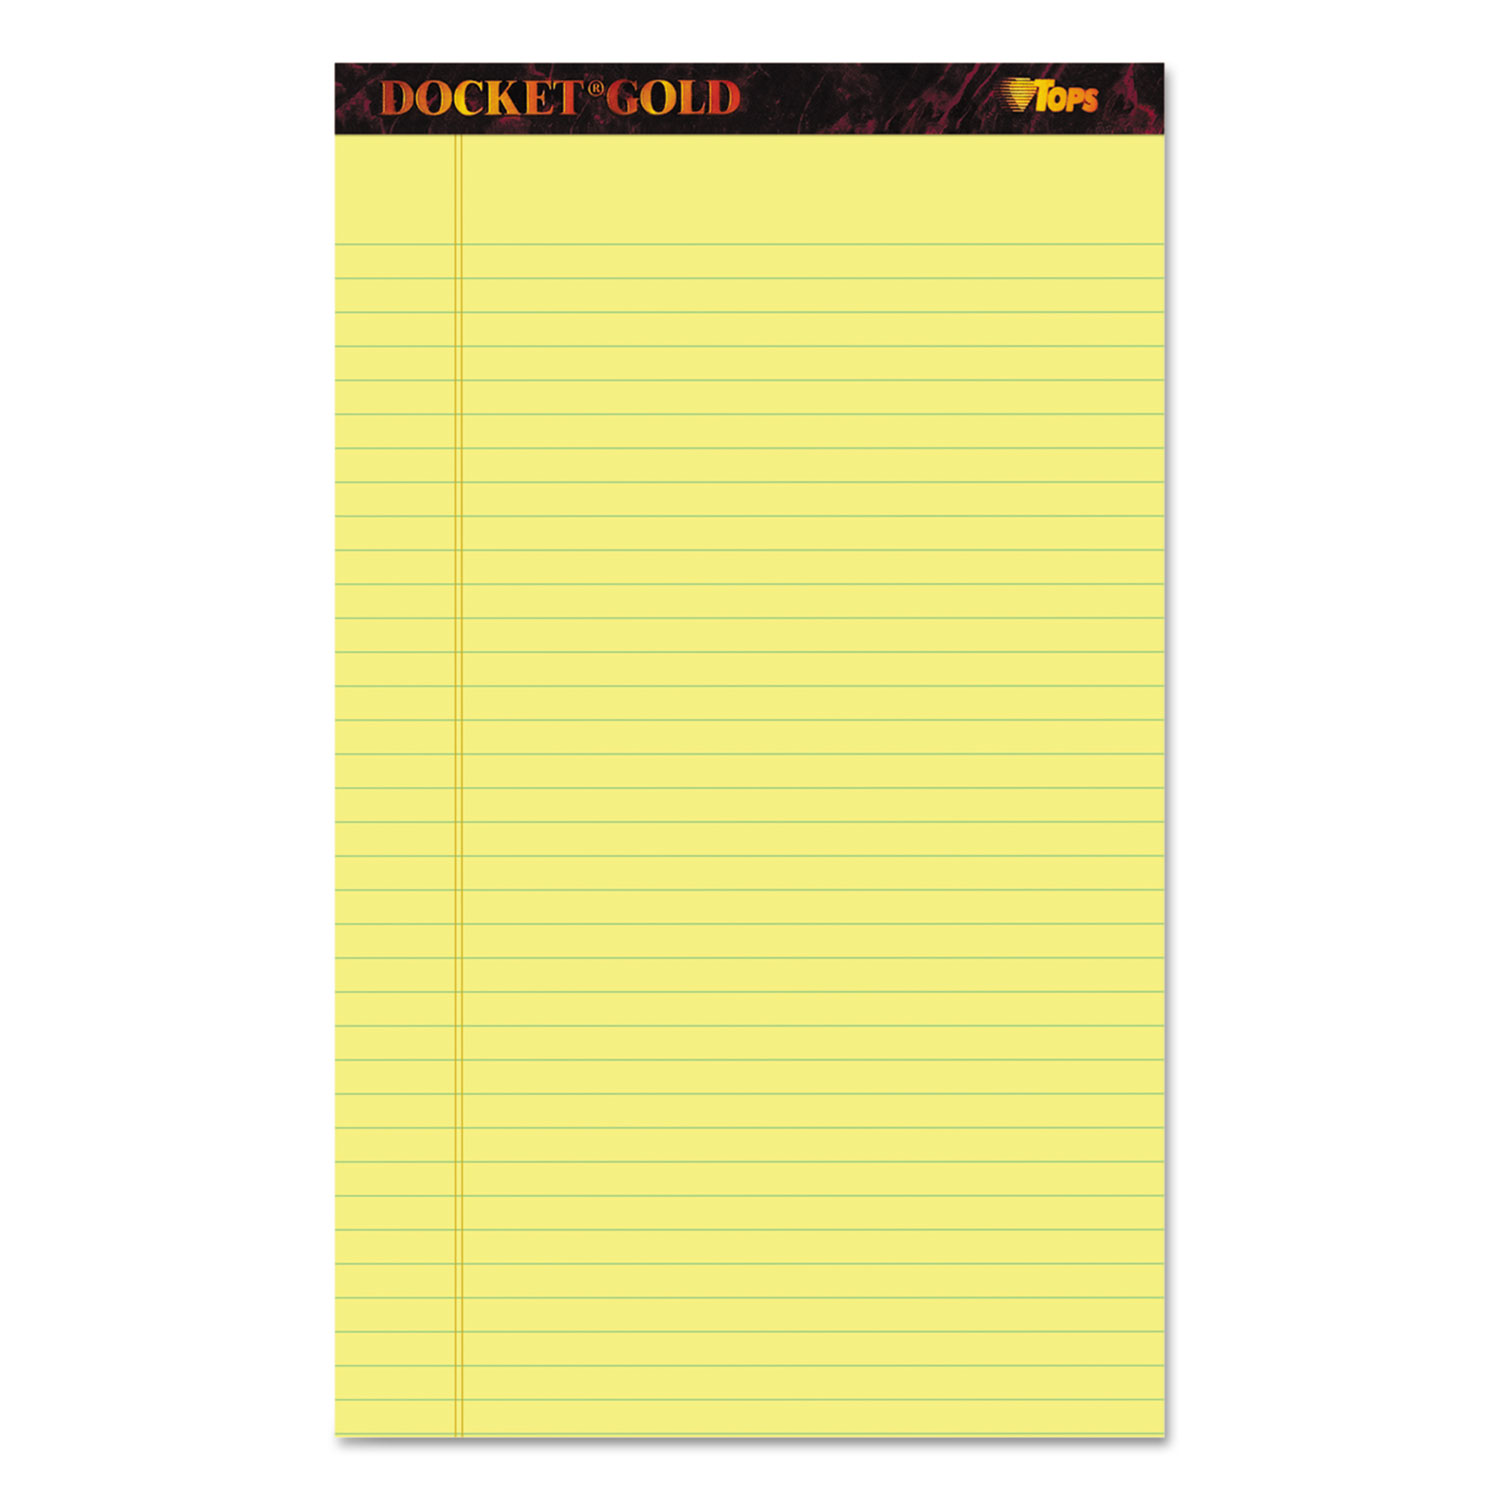  TOPS 63980 Docket Gold Ruled Perforated Pads, Wide/Legal Rule, 8.5 x 14, Canary, 50 Sheets, 12/Pack (TOP63980) 